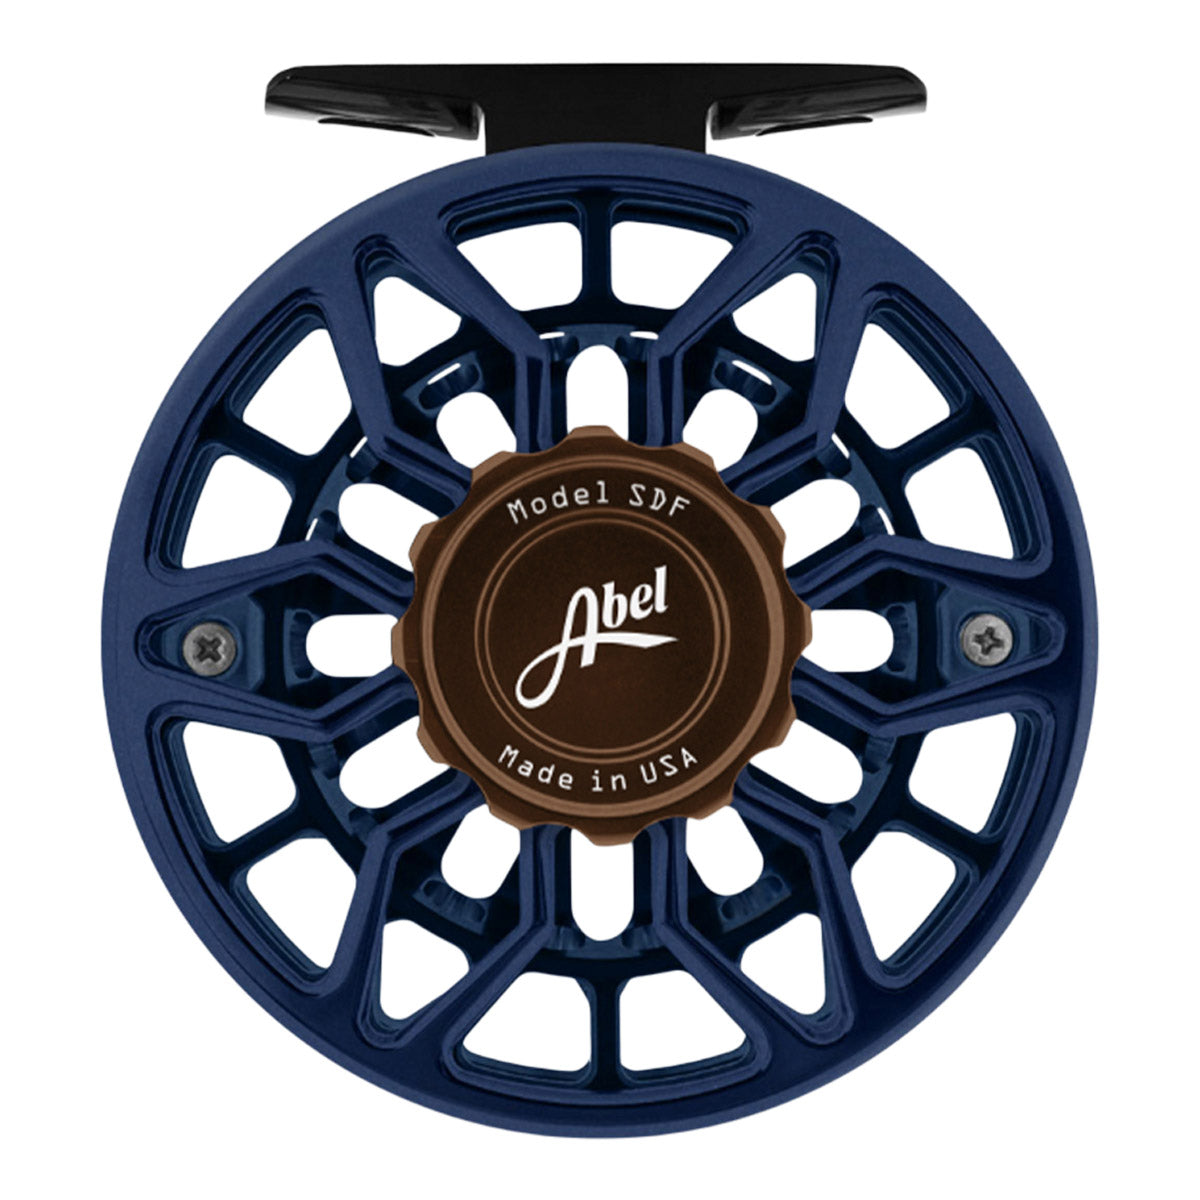 ABEL No. 0 Fly Reel Serial No. 699 Made in The U.S.A. — VINTAGE